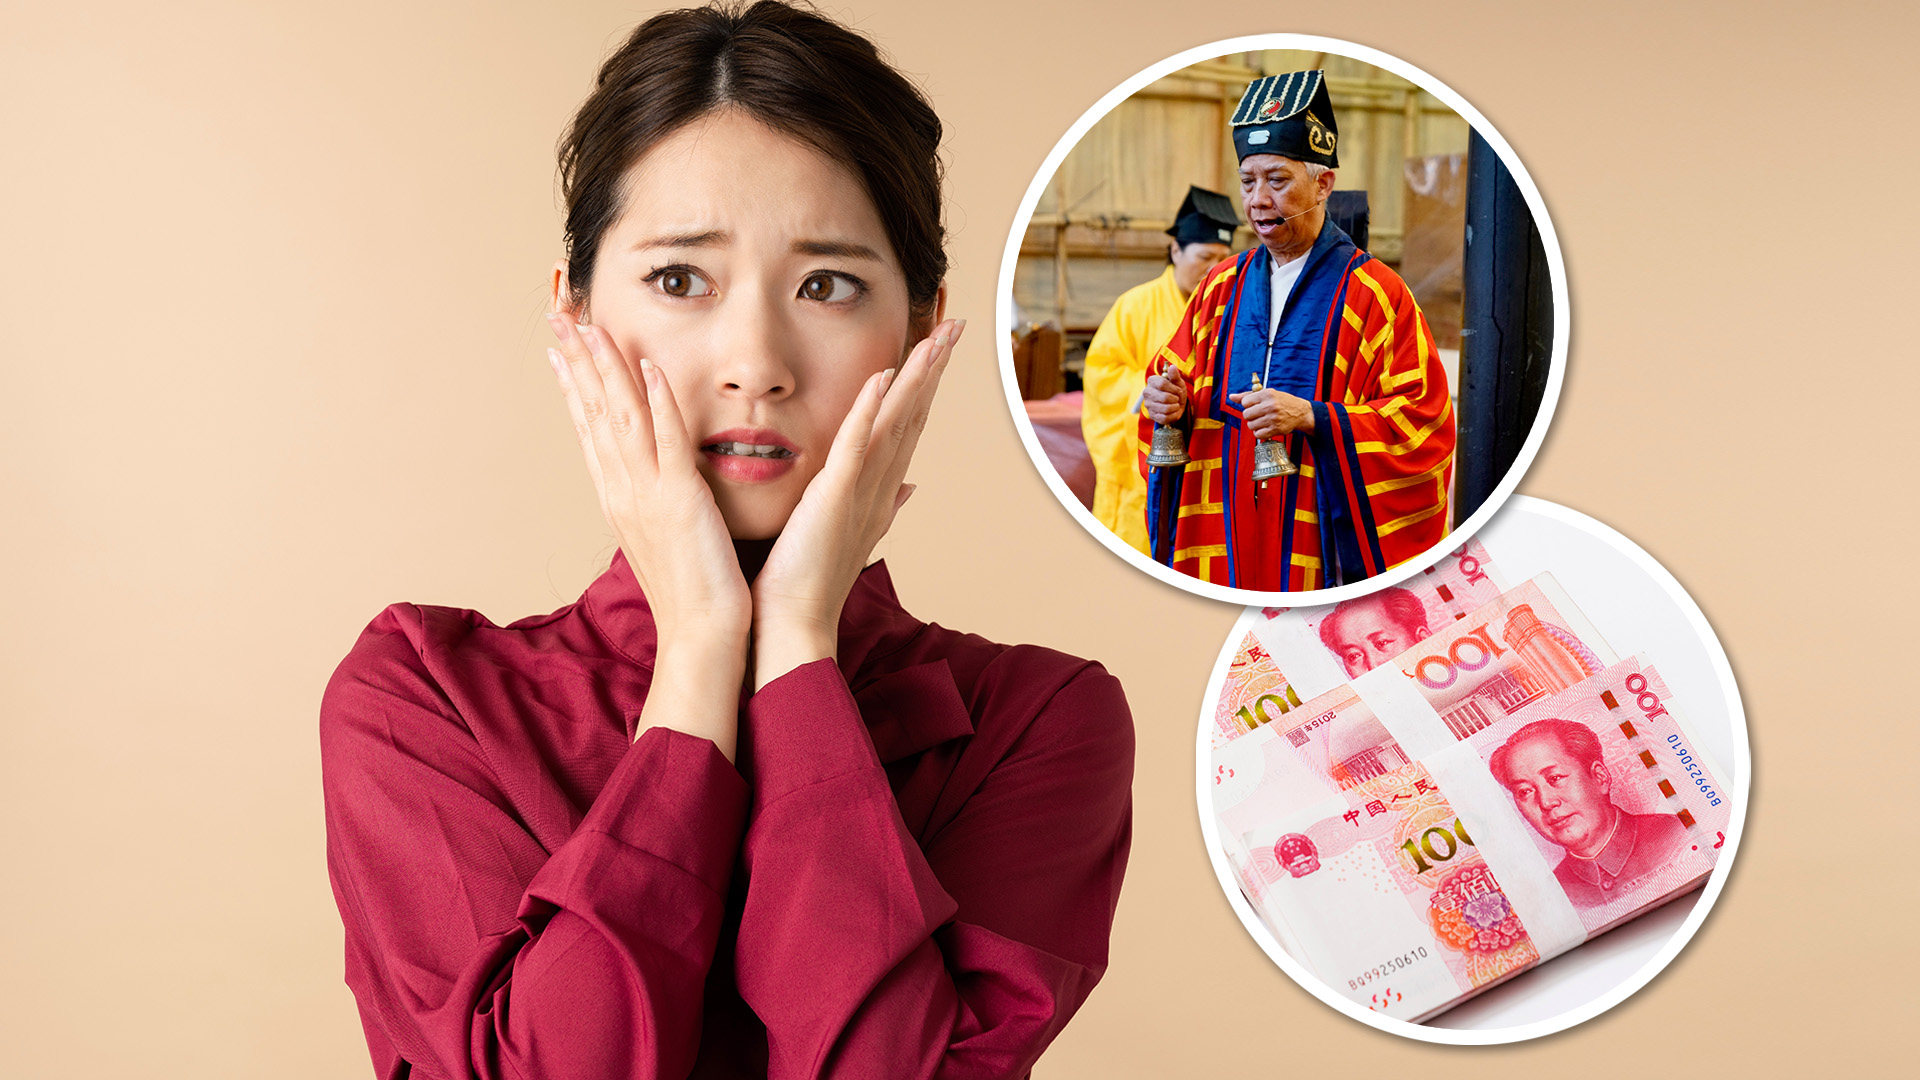 A gullible woman in China who was convinced she would die soon by her “best friend” posing as a fortune teller, handed over US$210,000  to “extend her life”. Photo: SCMP composite/Shutterstock